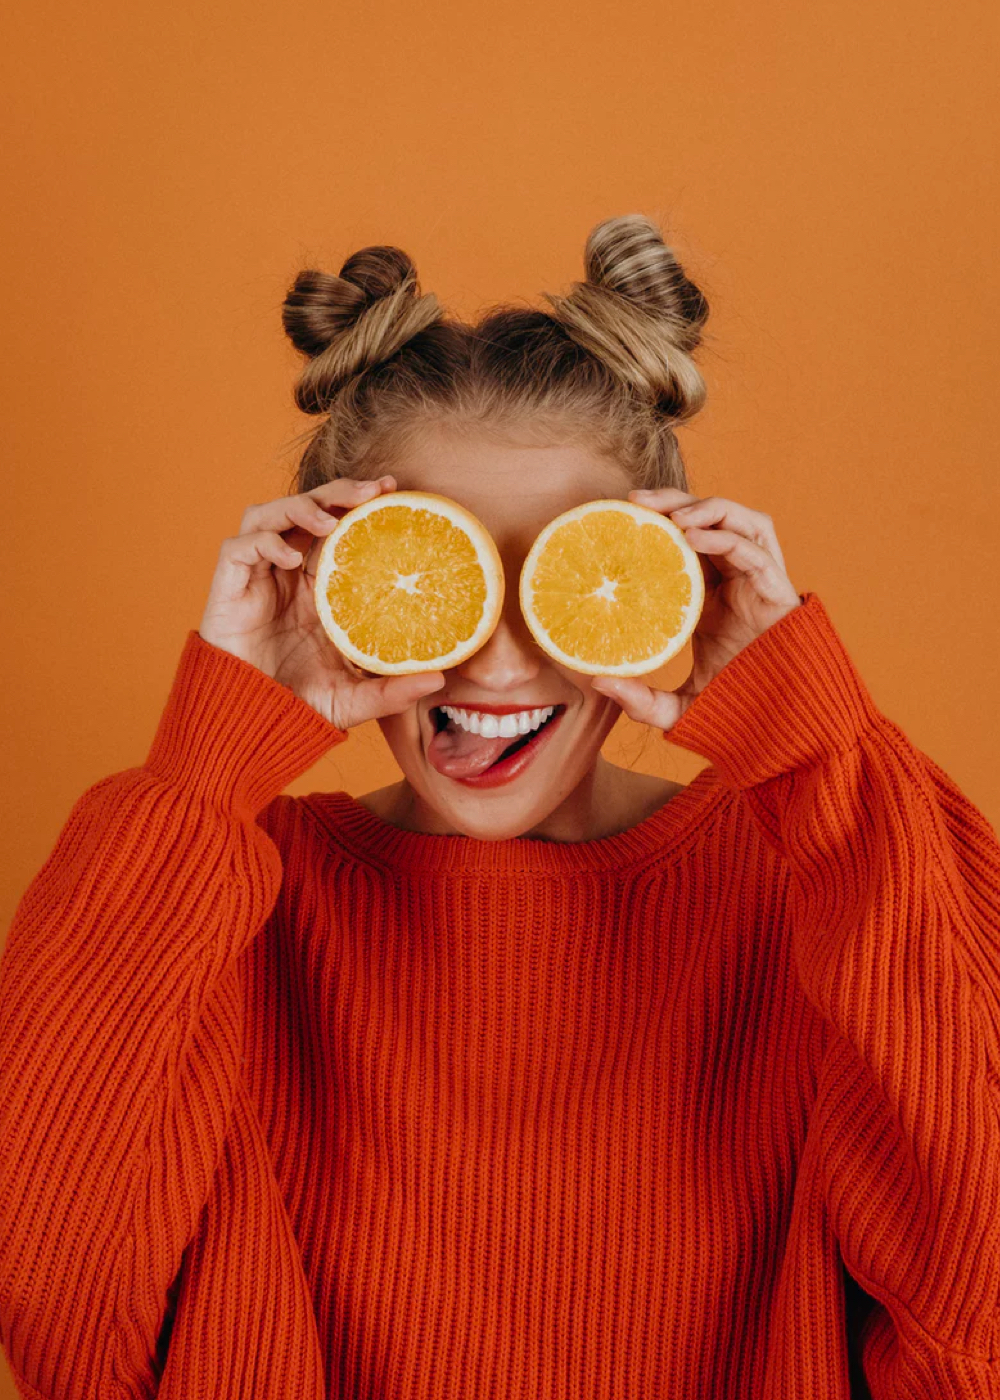 Sophie is standing in front of an orange background. She is smiling widely, sticking her tongue a little bit, and she's holding two halves of an orange in front of her eyes. She is wearing  cozy orange sweater and her hair is styled into top buns